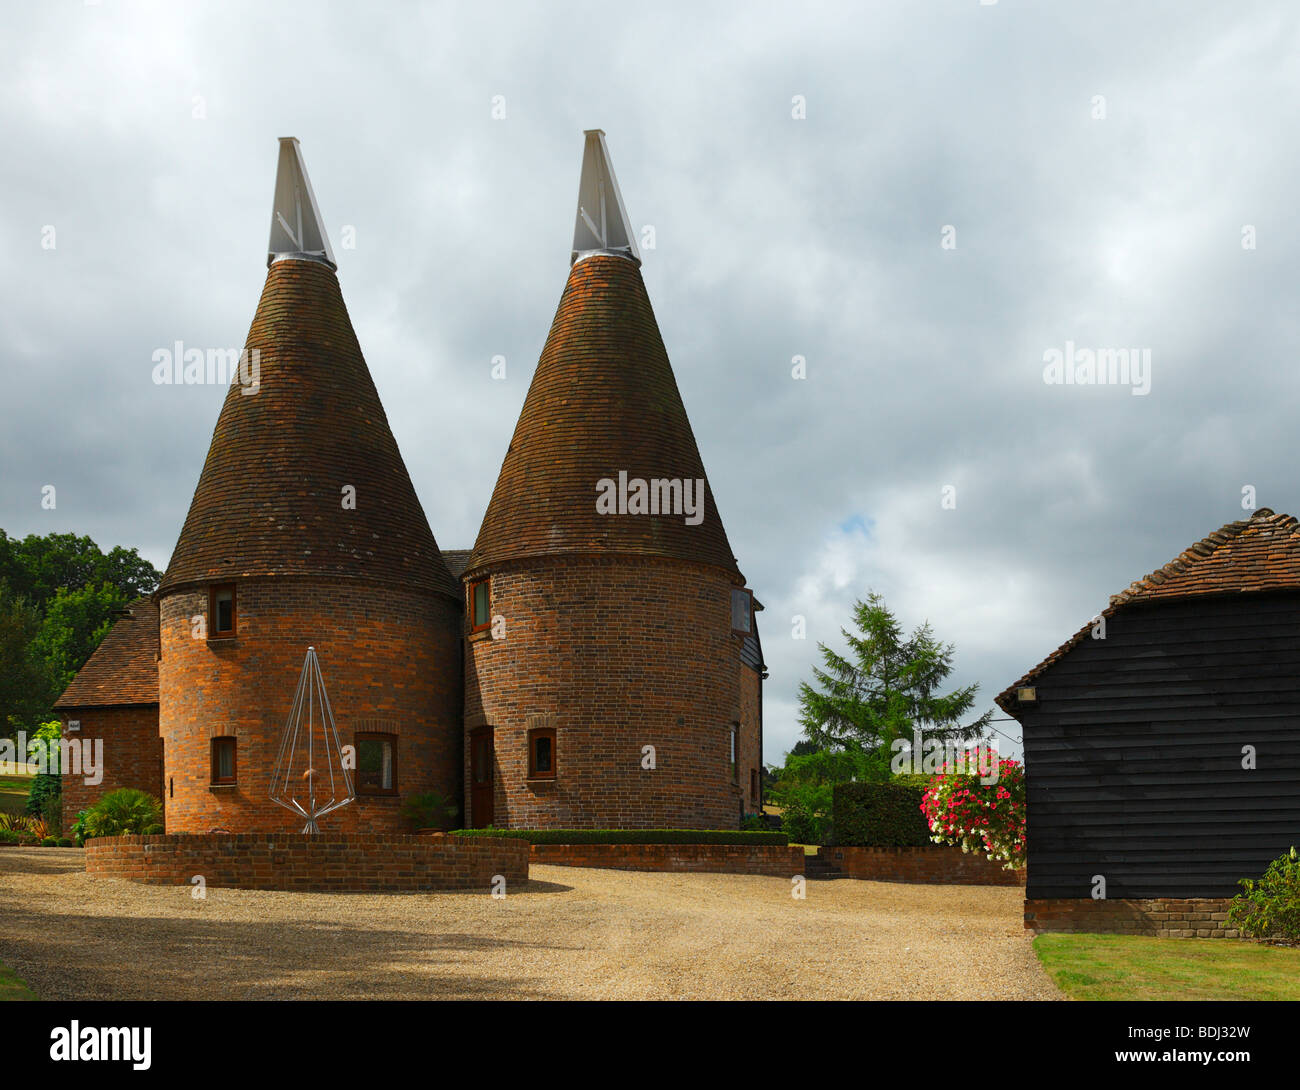 Oast Houses converted into dwellings, Leigh, Kent, England, UK. Stock Photo